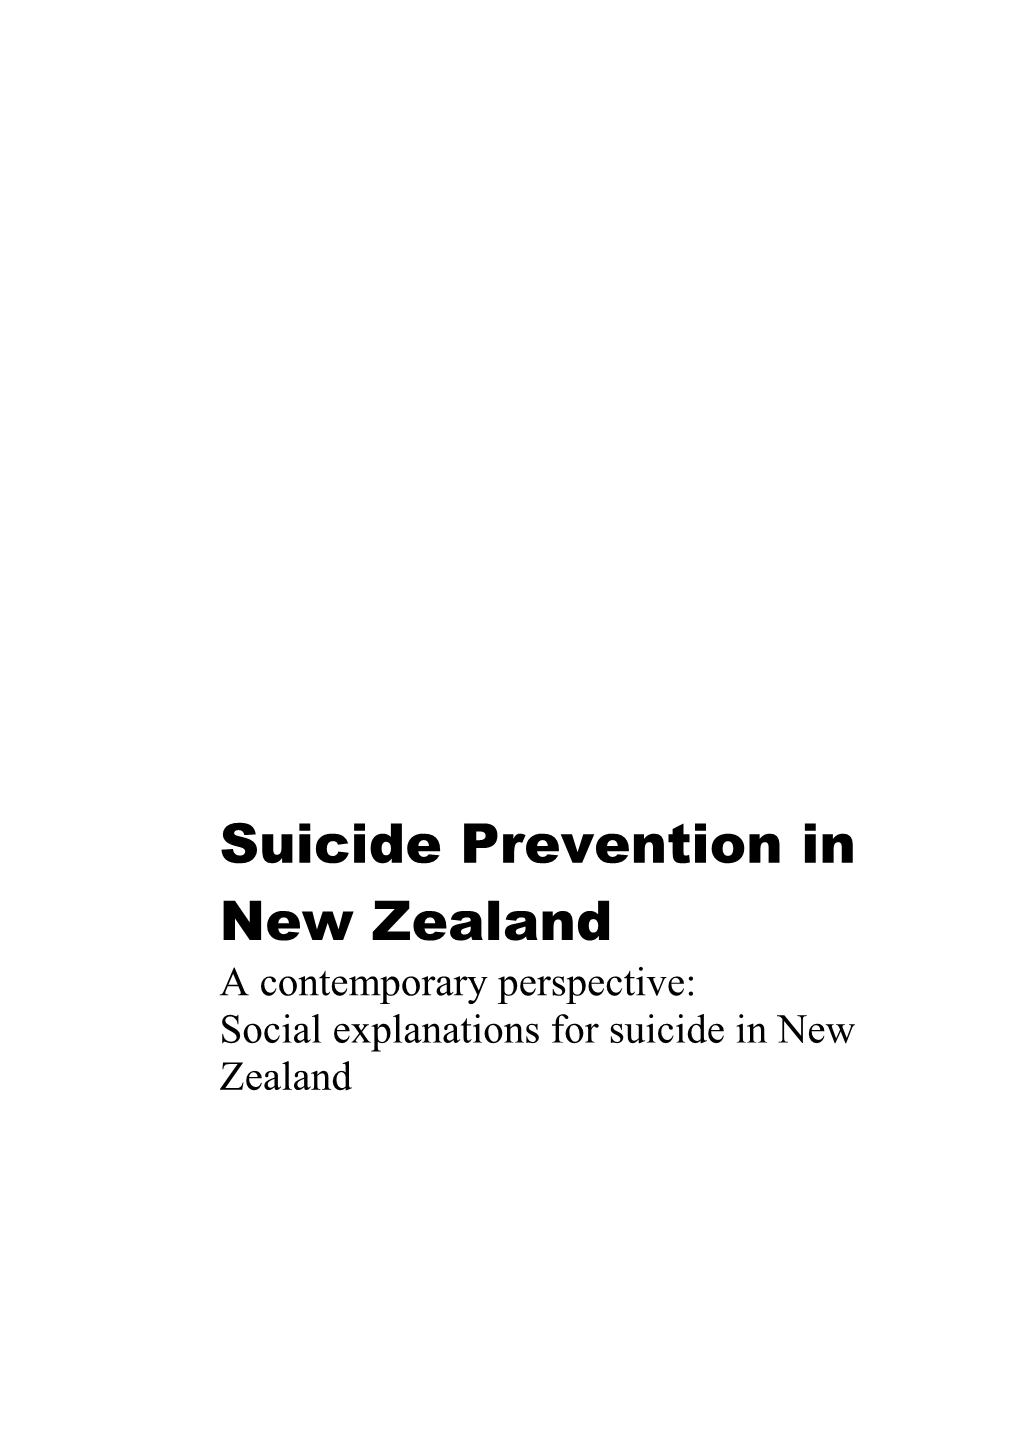 Suicide Prevention in New Zealand - a Contemporary Perspective: Social Explanations For